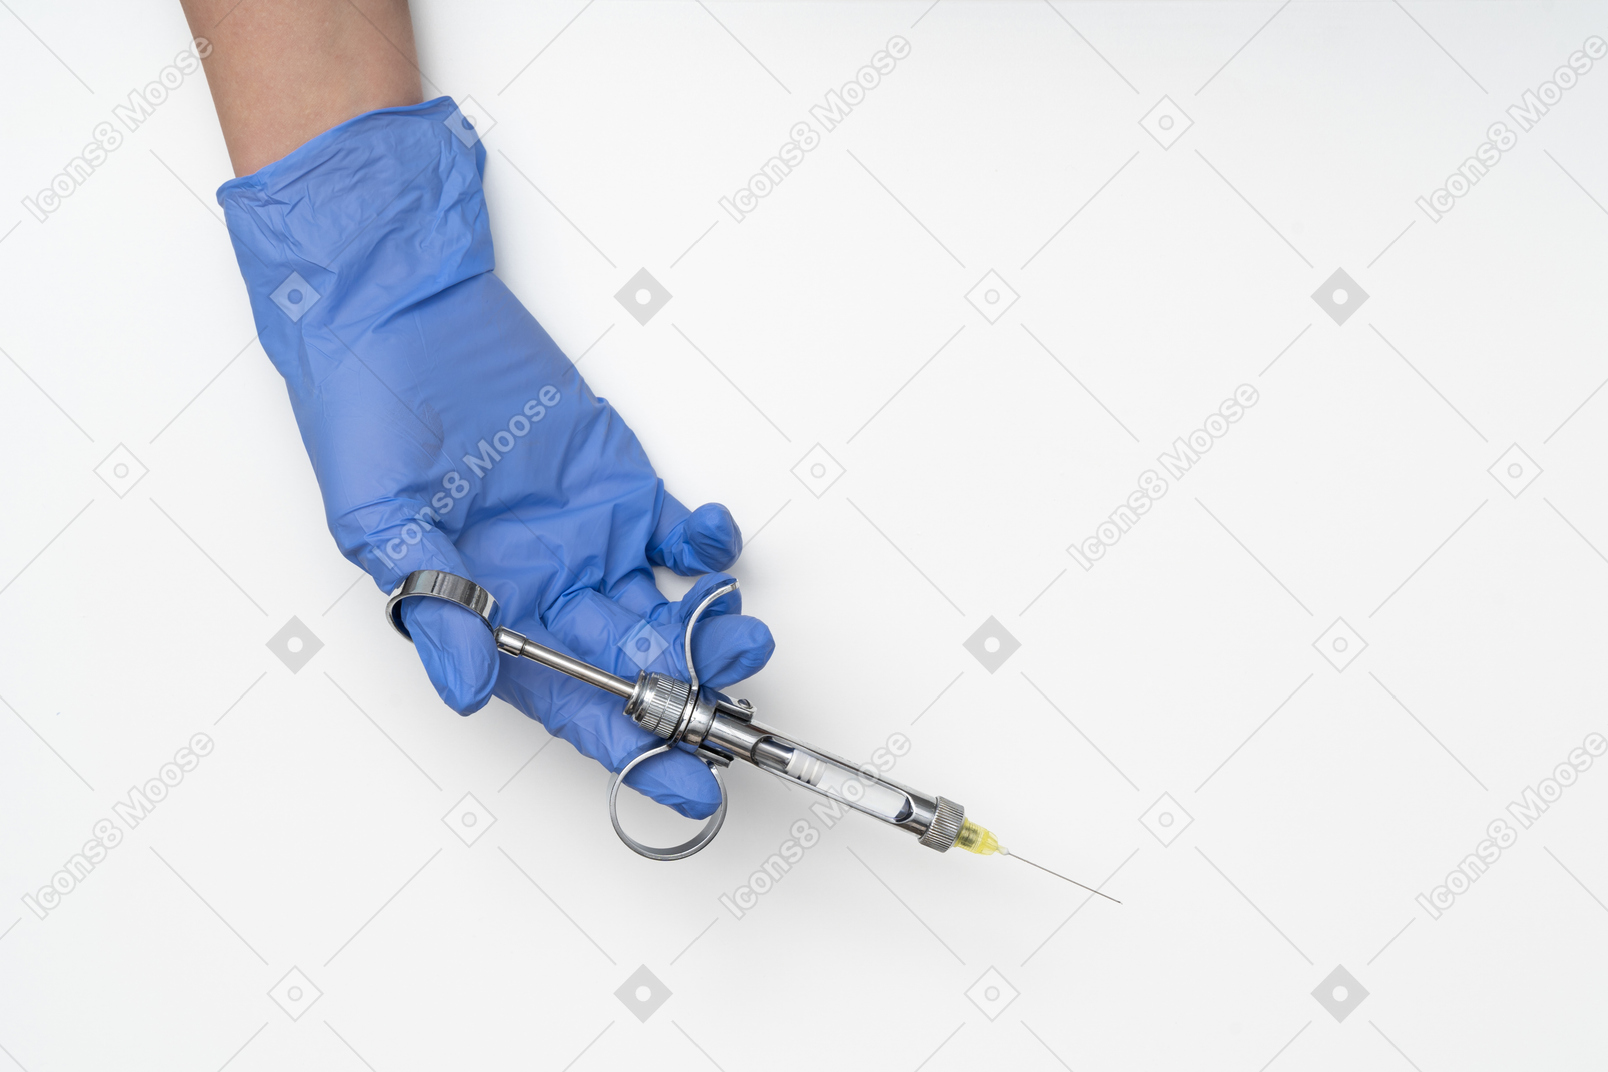 Hand in surgical glove holding a syringe